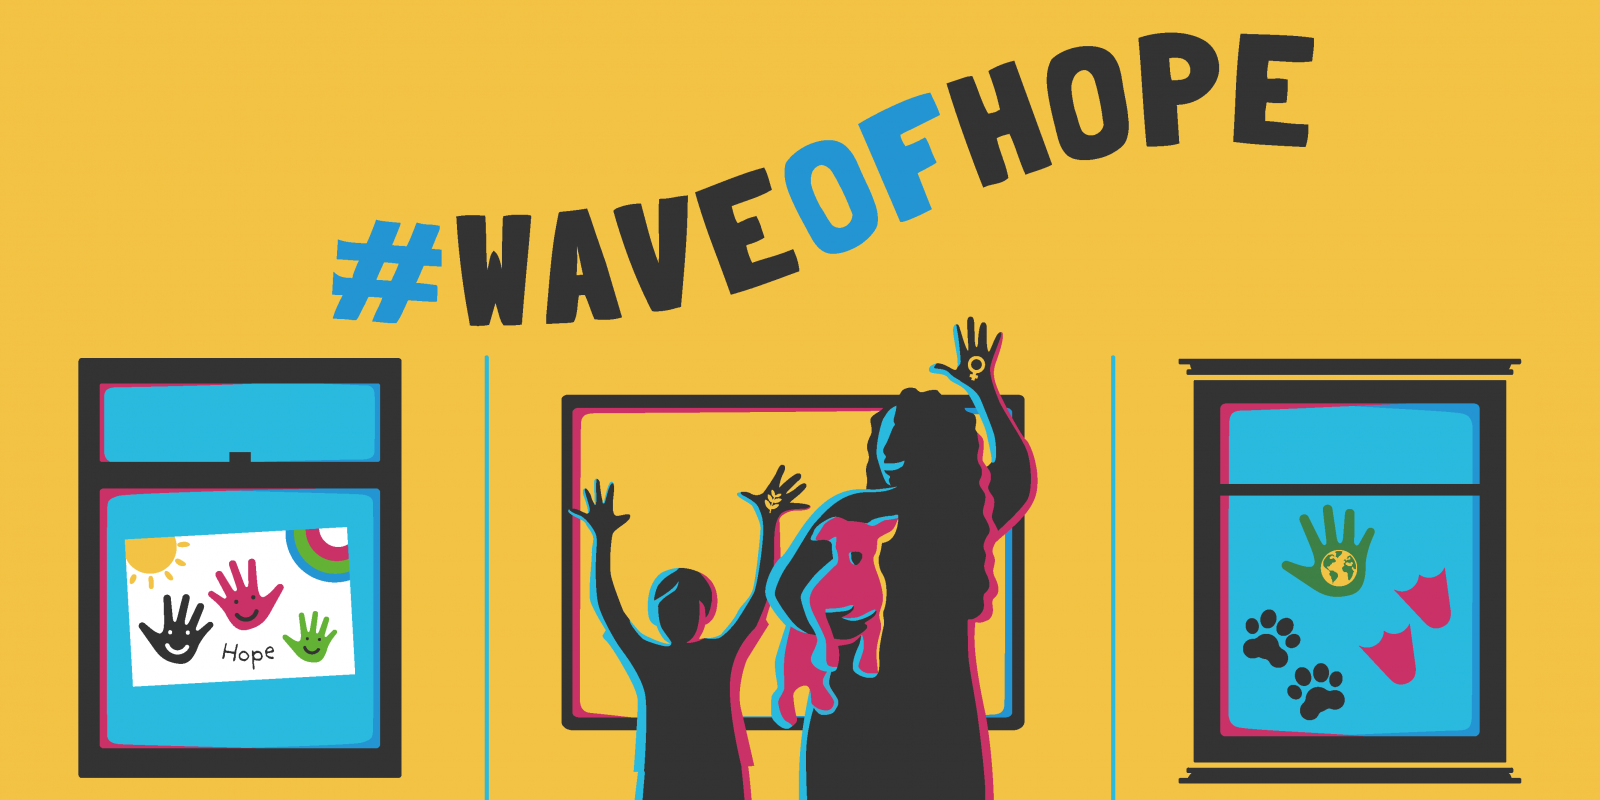 colourful graphic illustration of a silhouette of a child and adult (who is holding a dog) waving through their window. #WaveOfHope is written in wavy writing across the top and there are crafty hand prints displayed in the other two windows